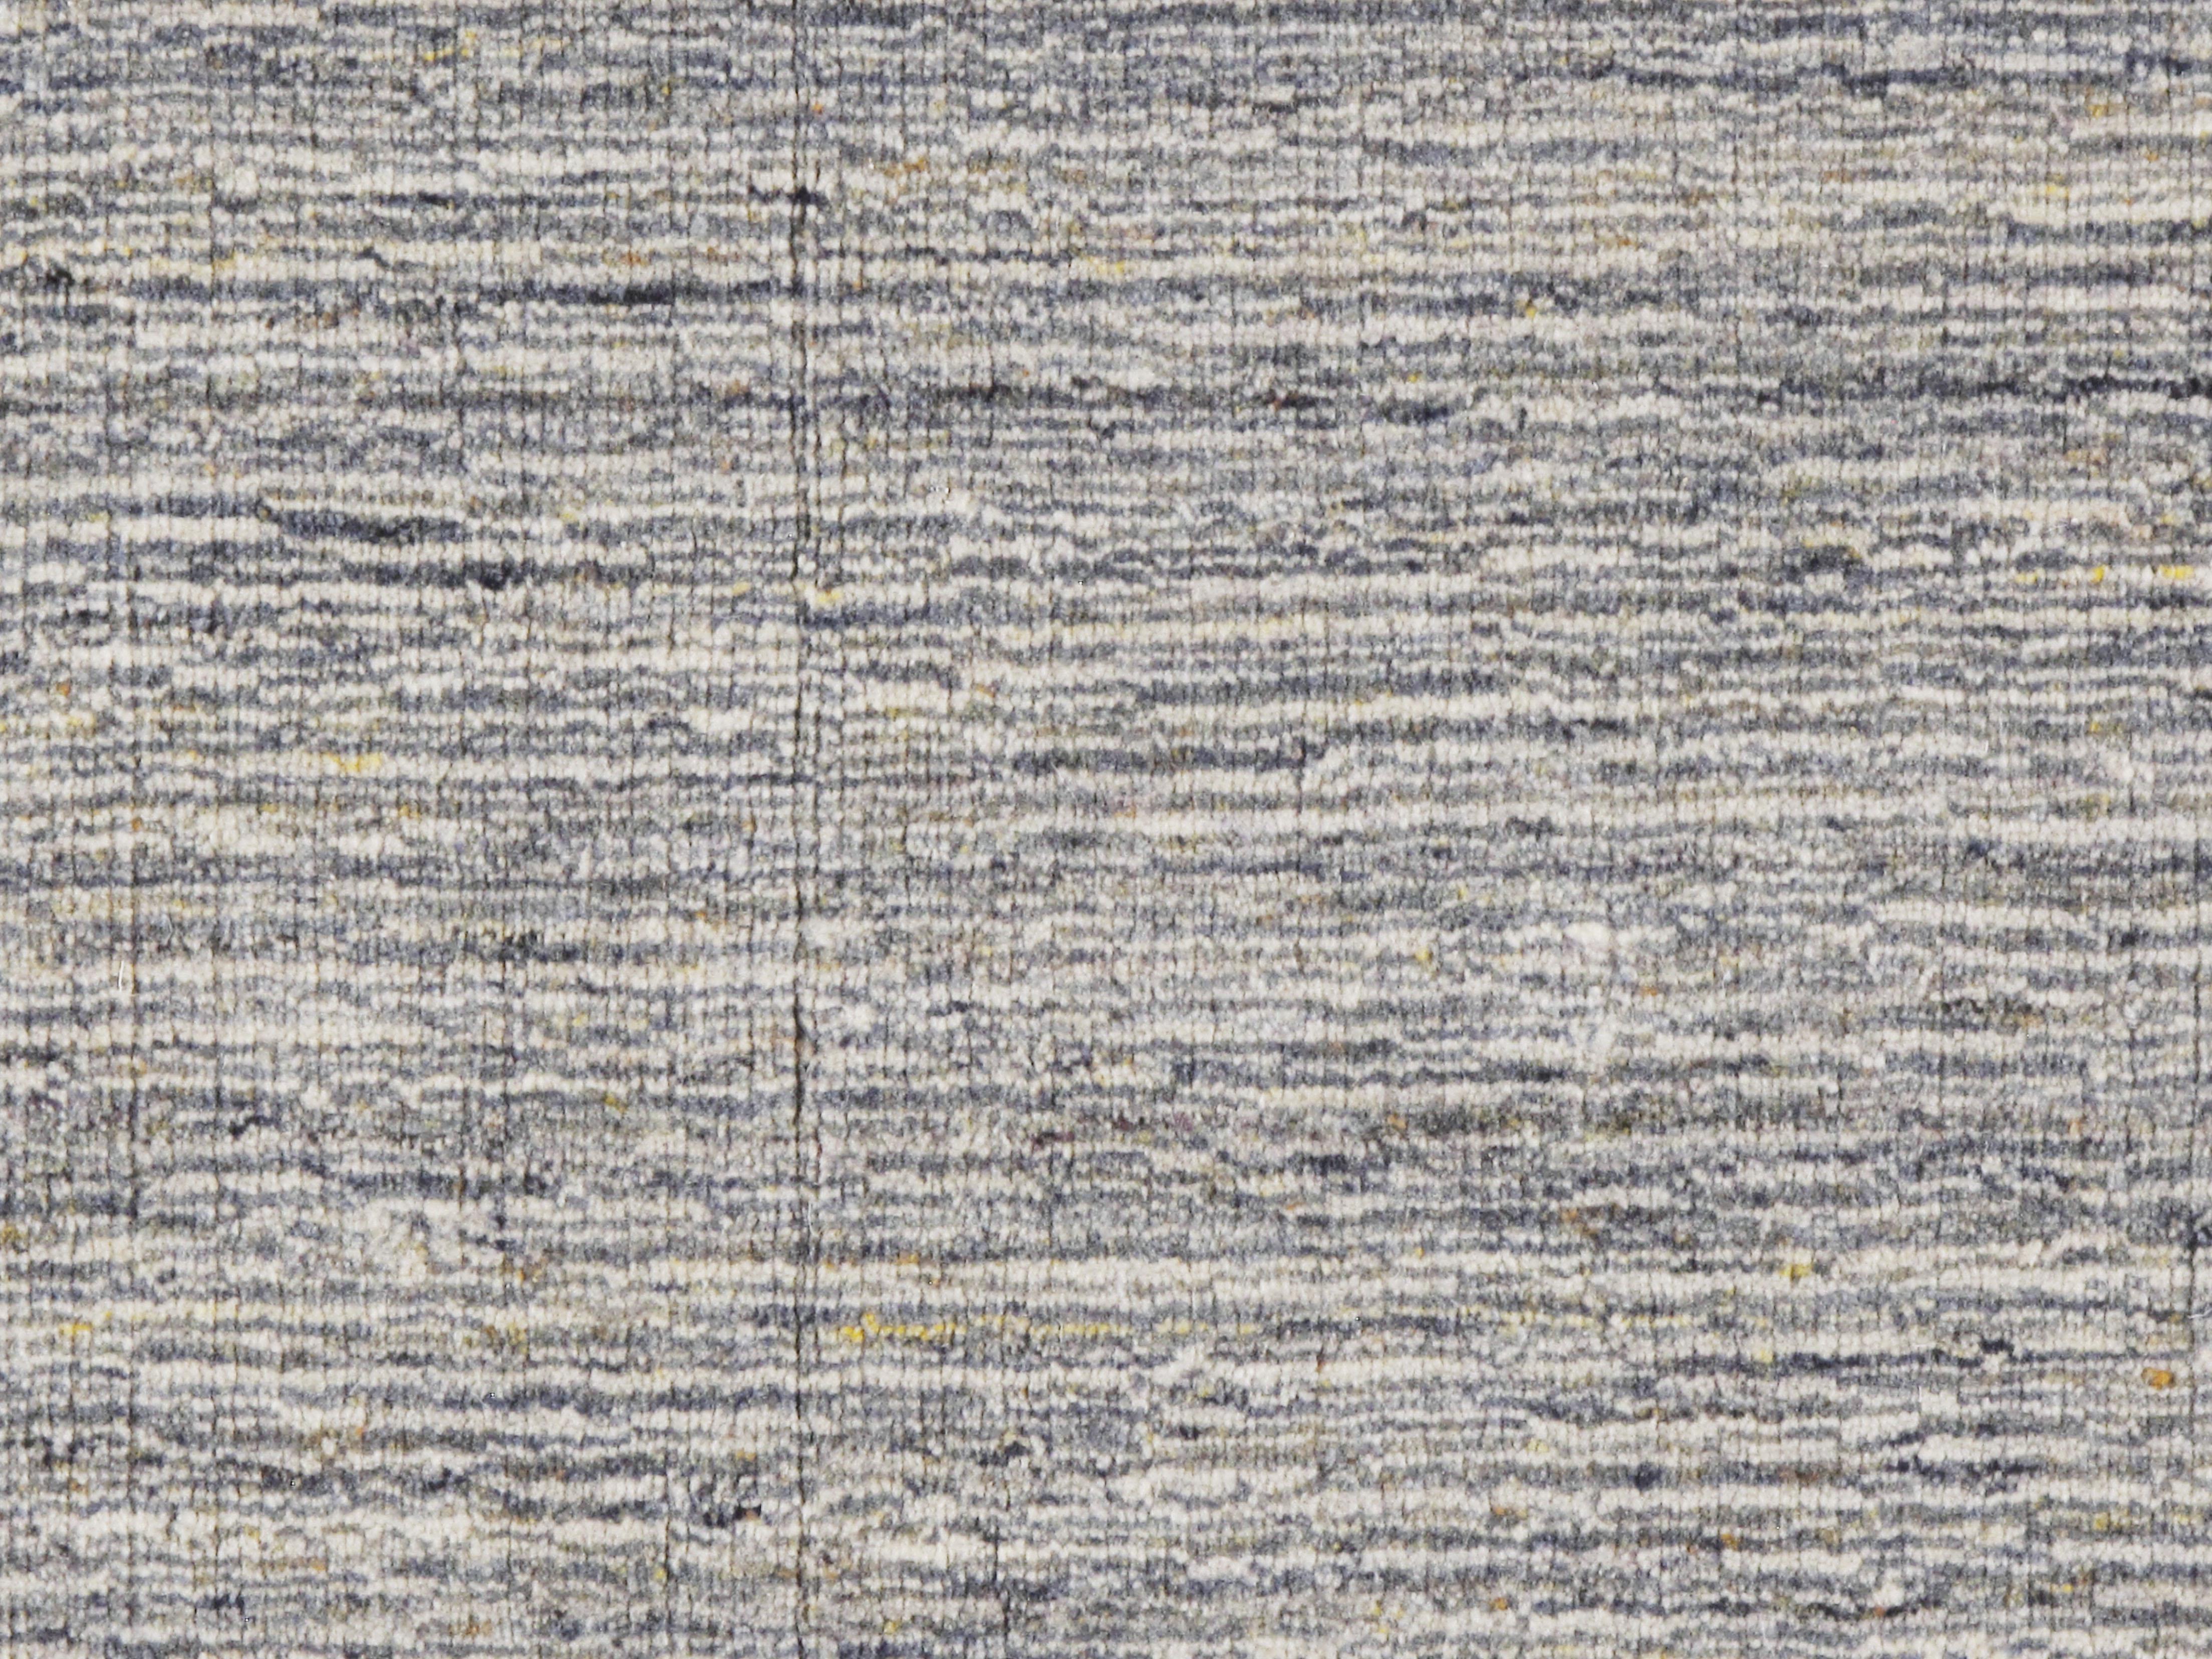 Contemporary Omni rug silver charcoal ivory 4' x 6'. A hand knotted contemporary rug with a simple but attractive pattern.